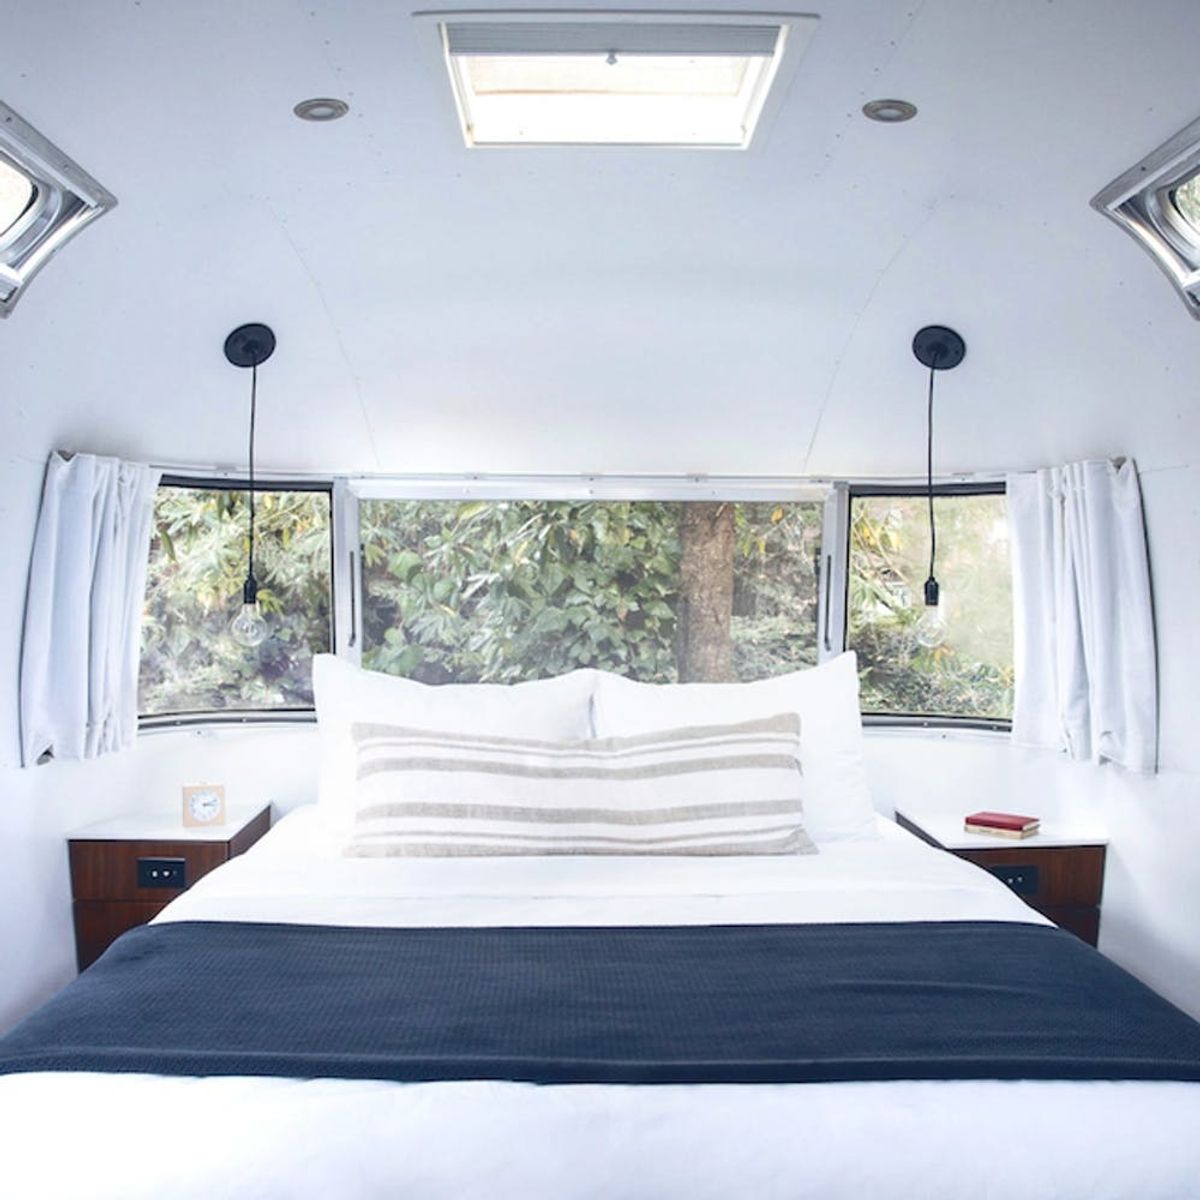 5 Reasons Your Bachelorette Party Should Be in an Airstream